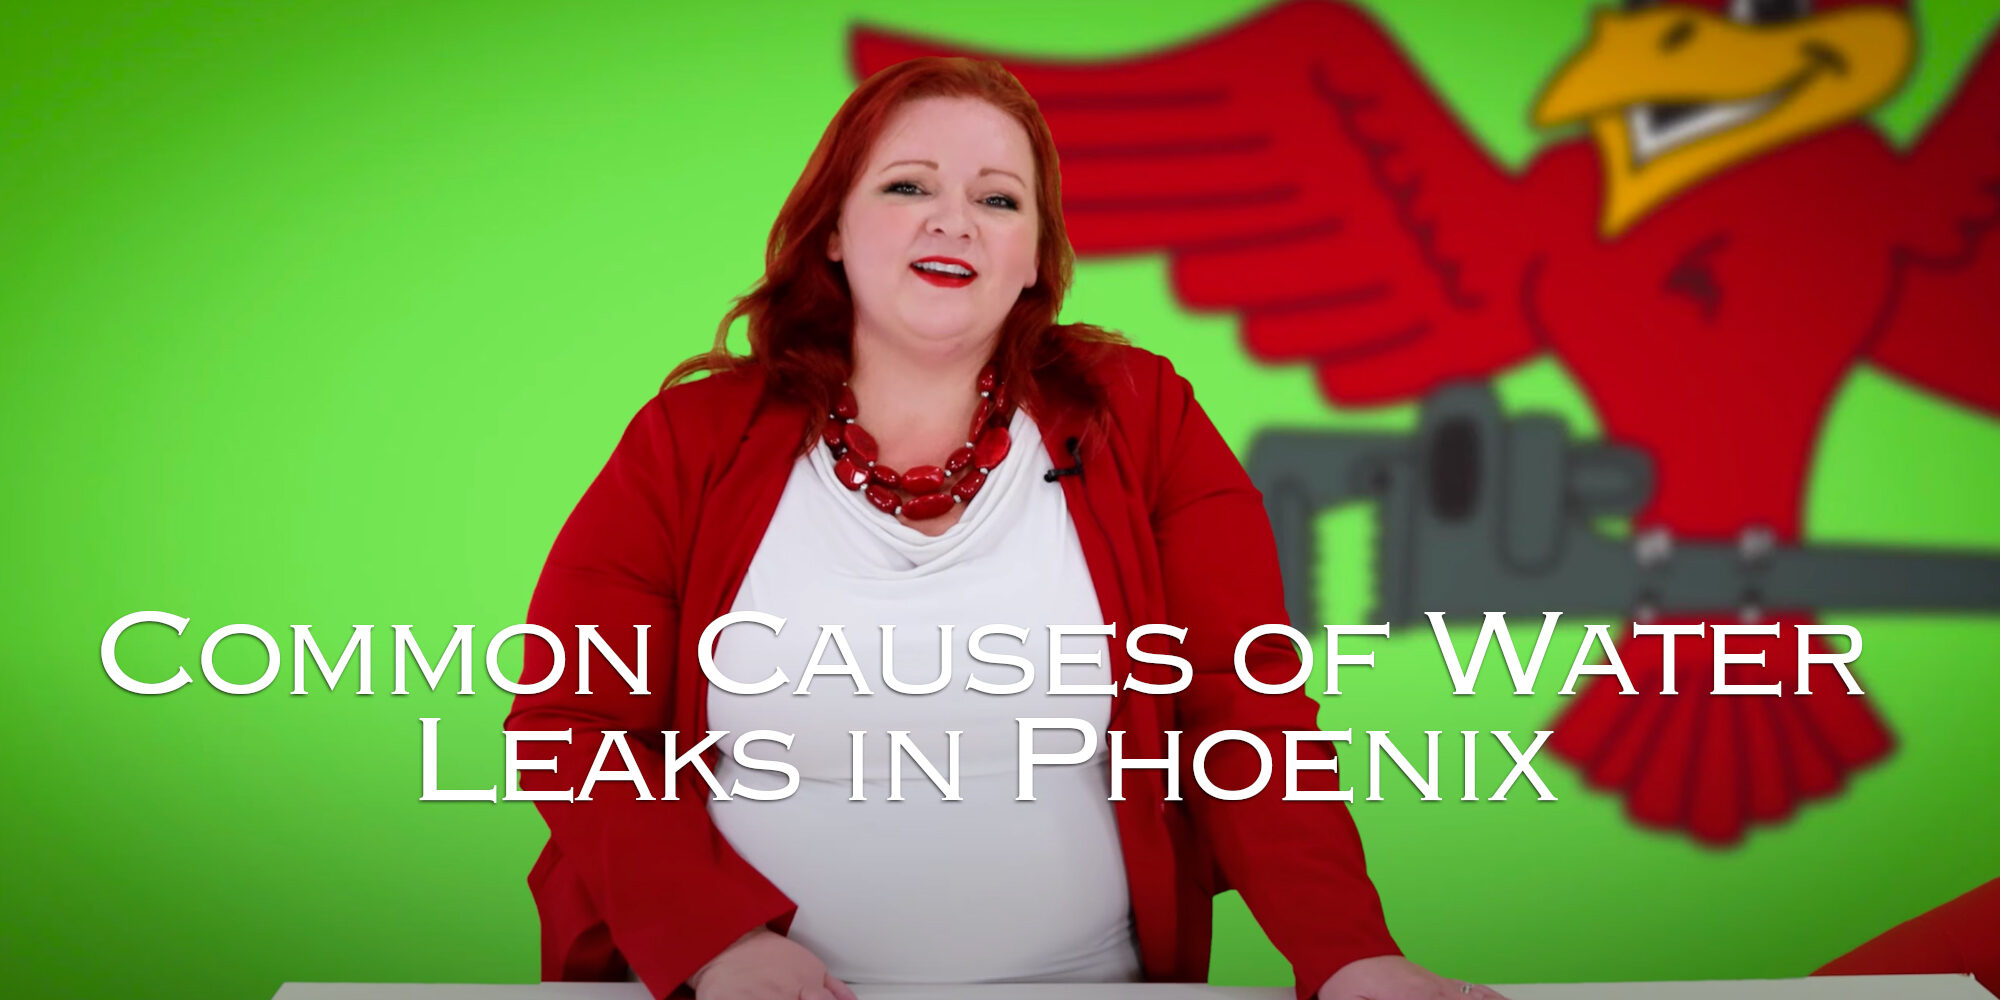 Stephanie Robins, owner of Robins Plumbing with featured blog titled 'Common Causes Of Water Leaks In Phoenix'